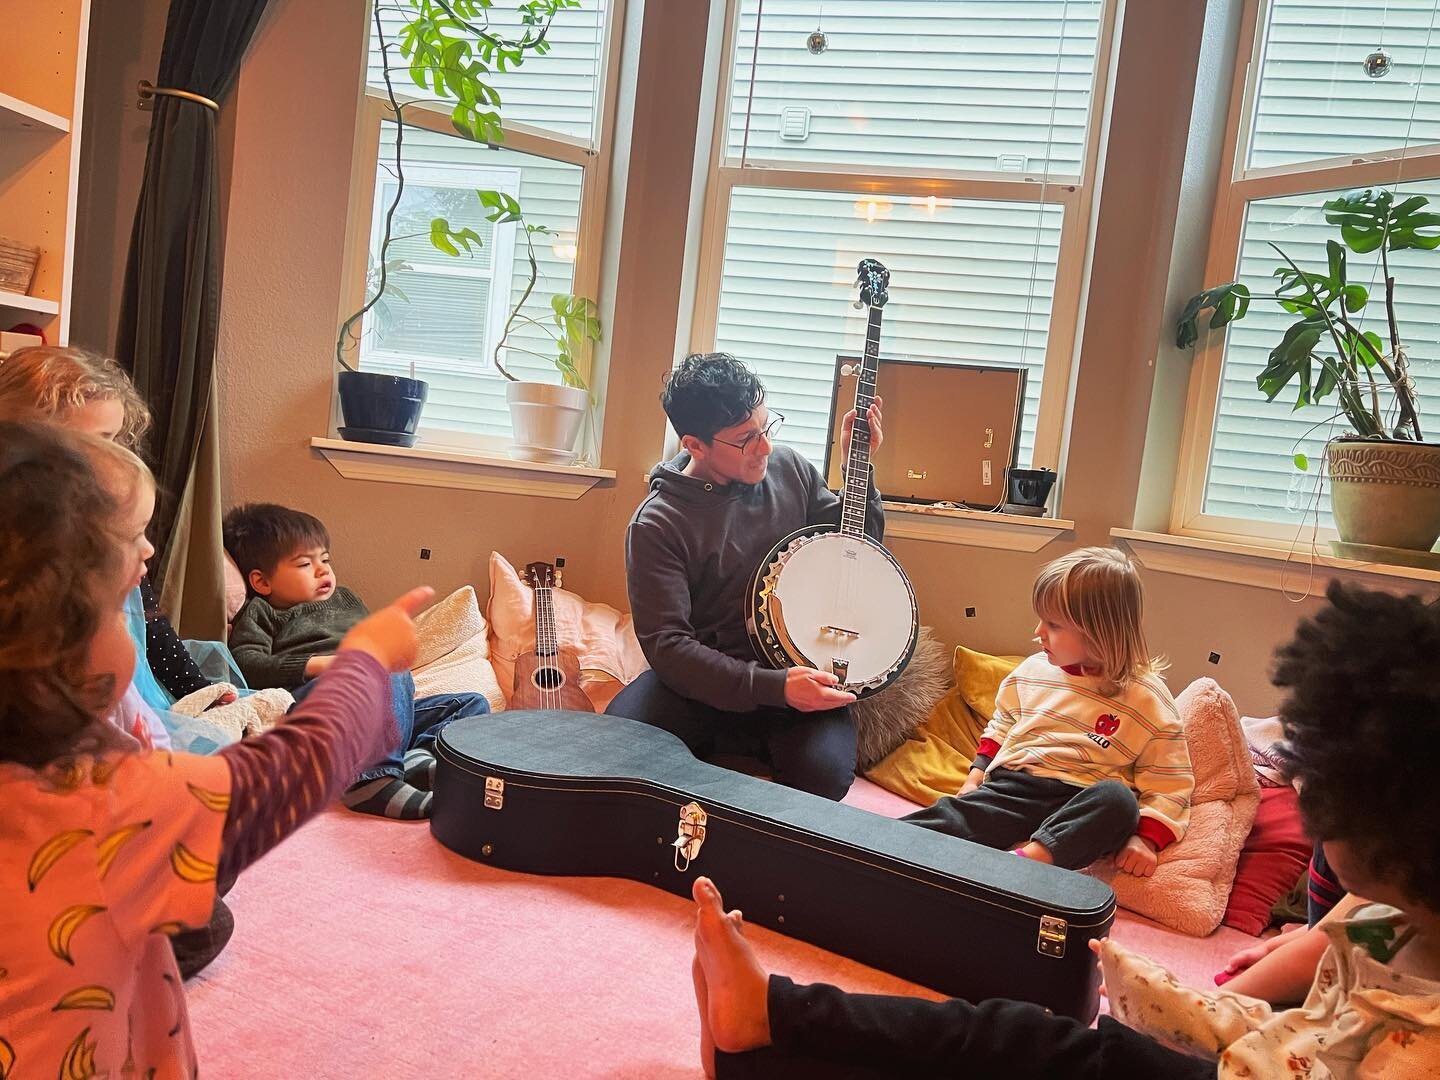 Each morning I play a ukulele at circle time and the children even play it sometimes. Also once a week our music teacher, Heidi, brings her guitar. This week we got to learn about two other types of stringed instruments&mdash; a banjo and a harp! Fun